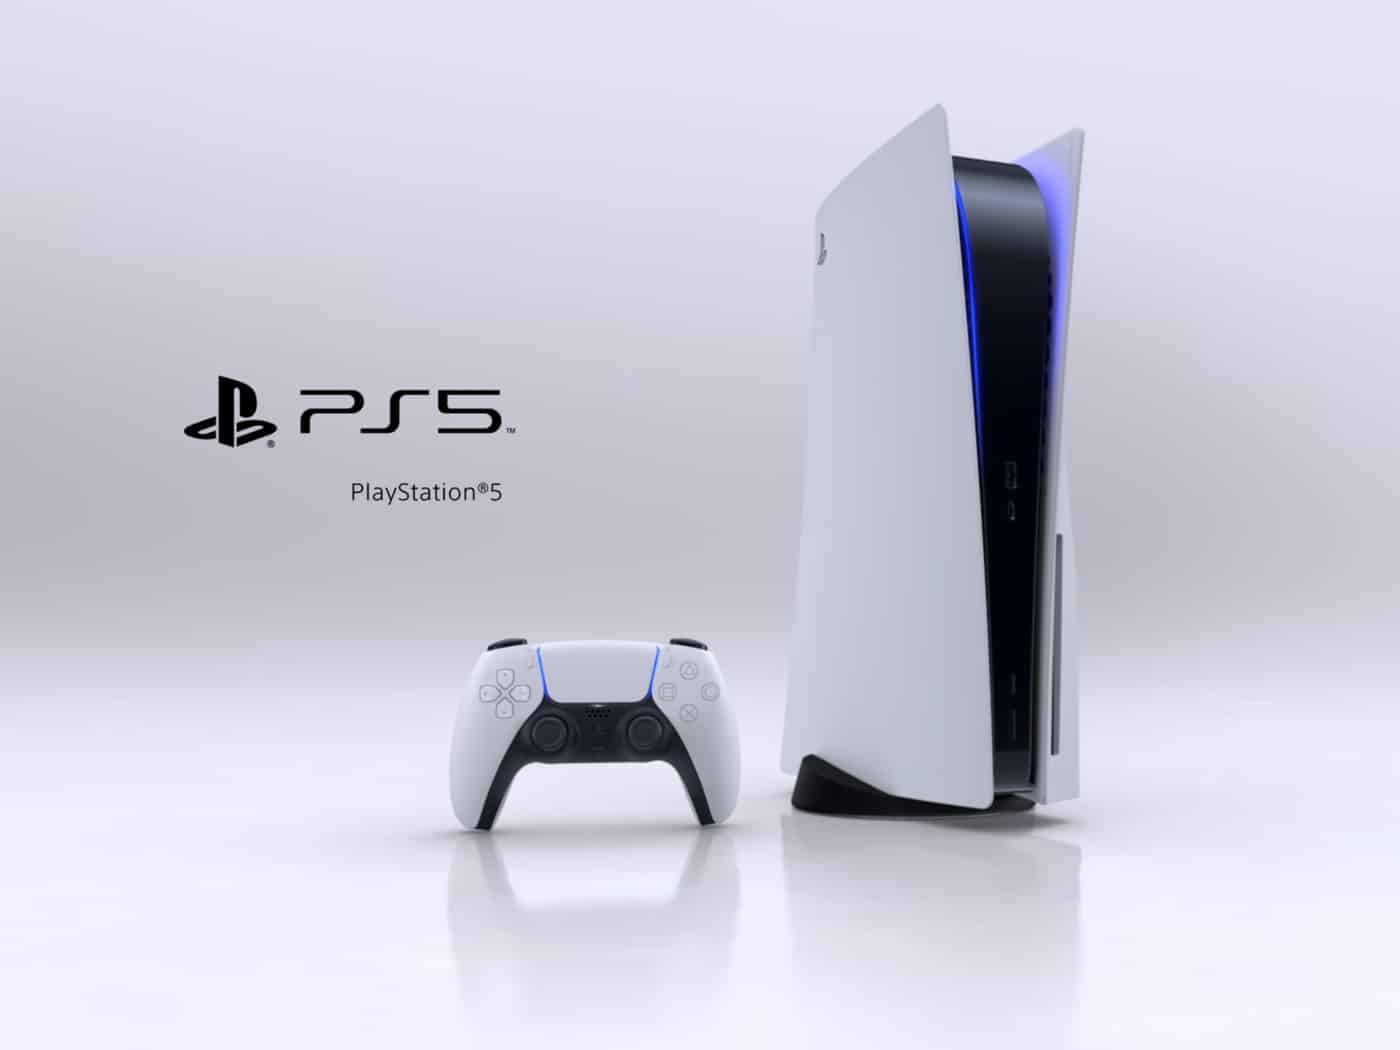 The PS5 is a massive console that takes up a lot of space.